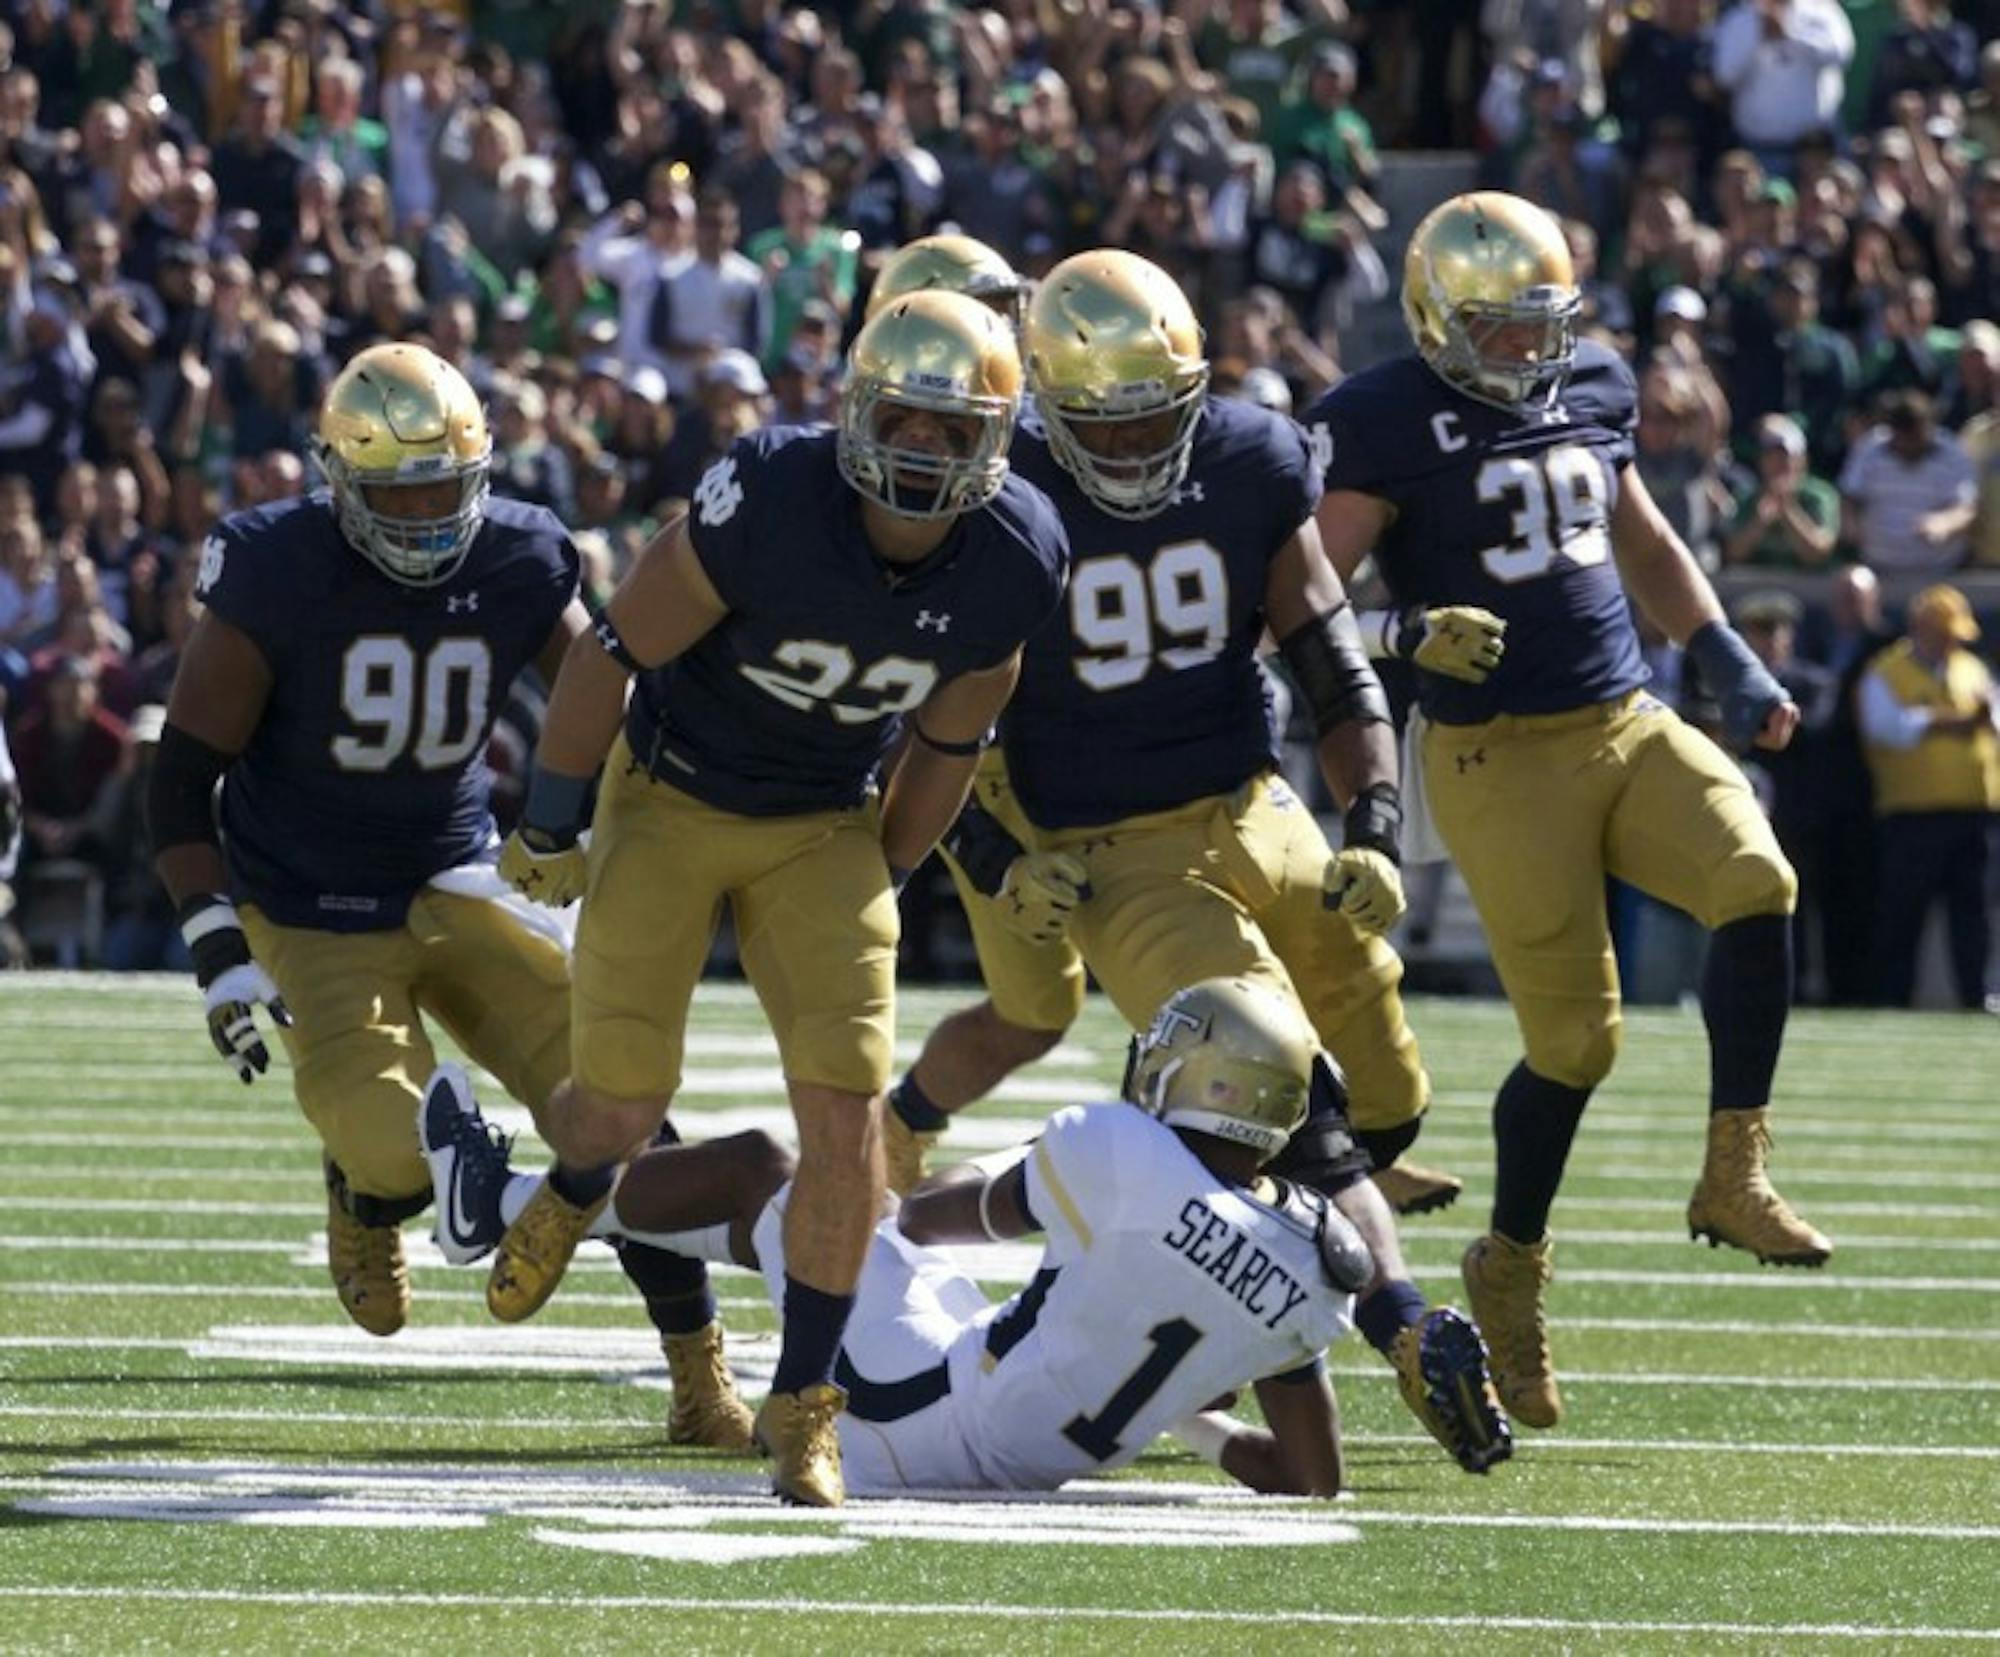 Flanked by his teammates, sophomore safety Drue Tranquill celebrates a third-down stop Saturday.